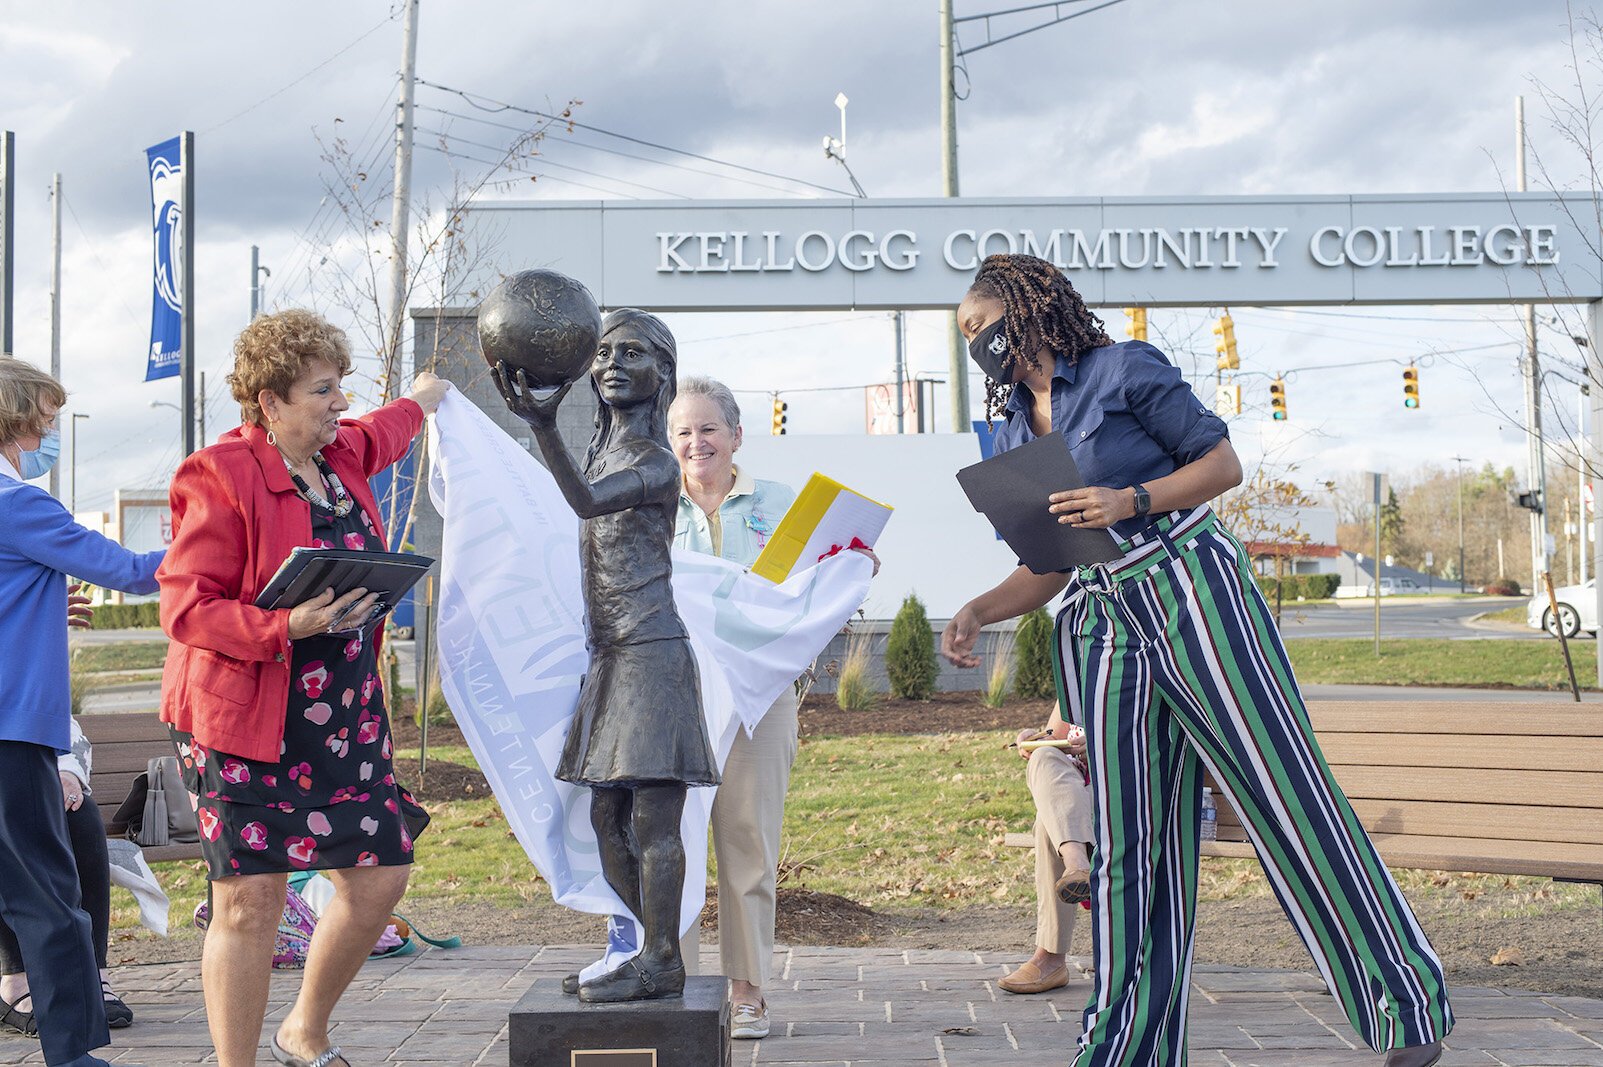 From left, Kay Calley-Martin and Kathy Shaw, co-chairs of the American Association of University Battle Creek Legacy Centennial Community Project Fund with Kellogg Community College President Dr. Adrien L. Bennings, unveil the statue, “Hope.”